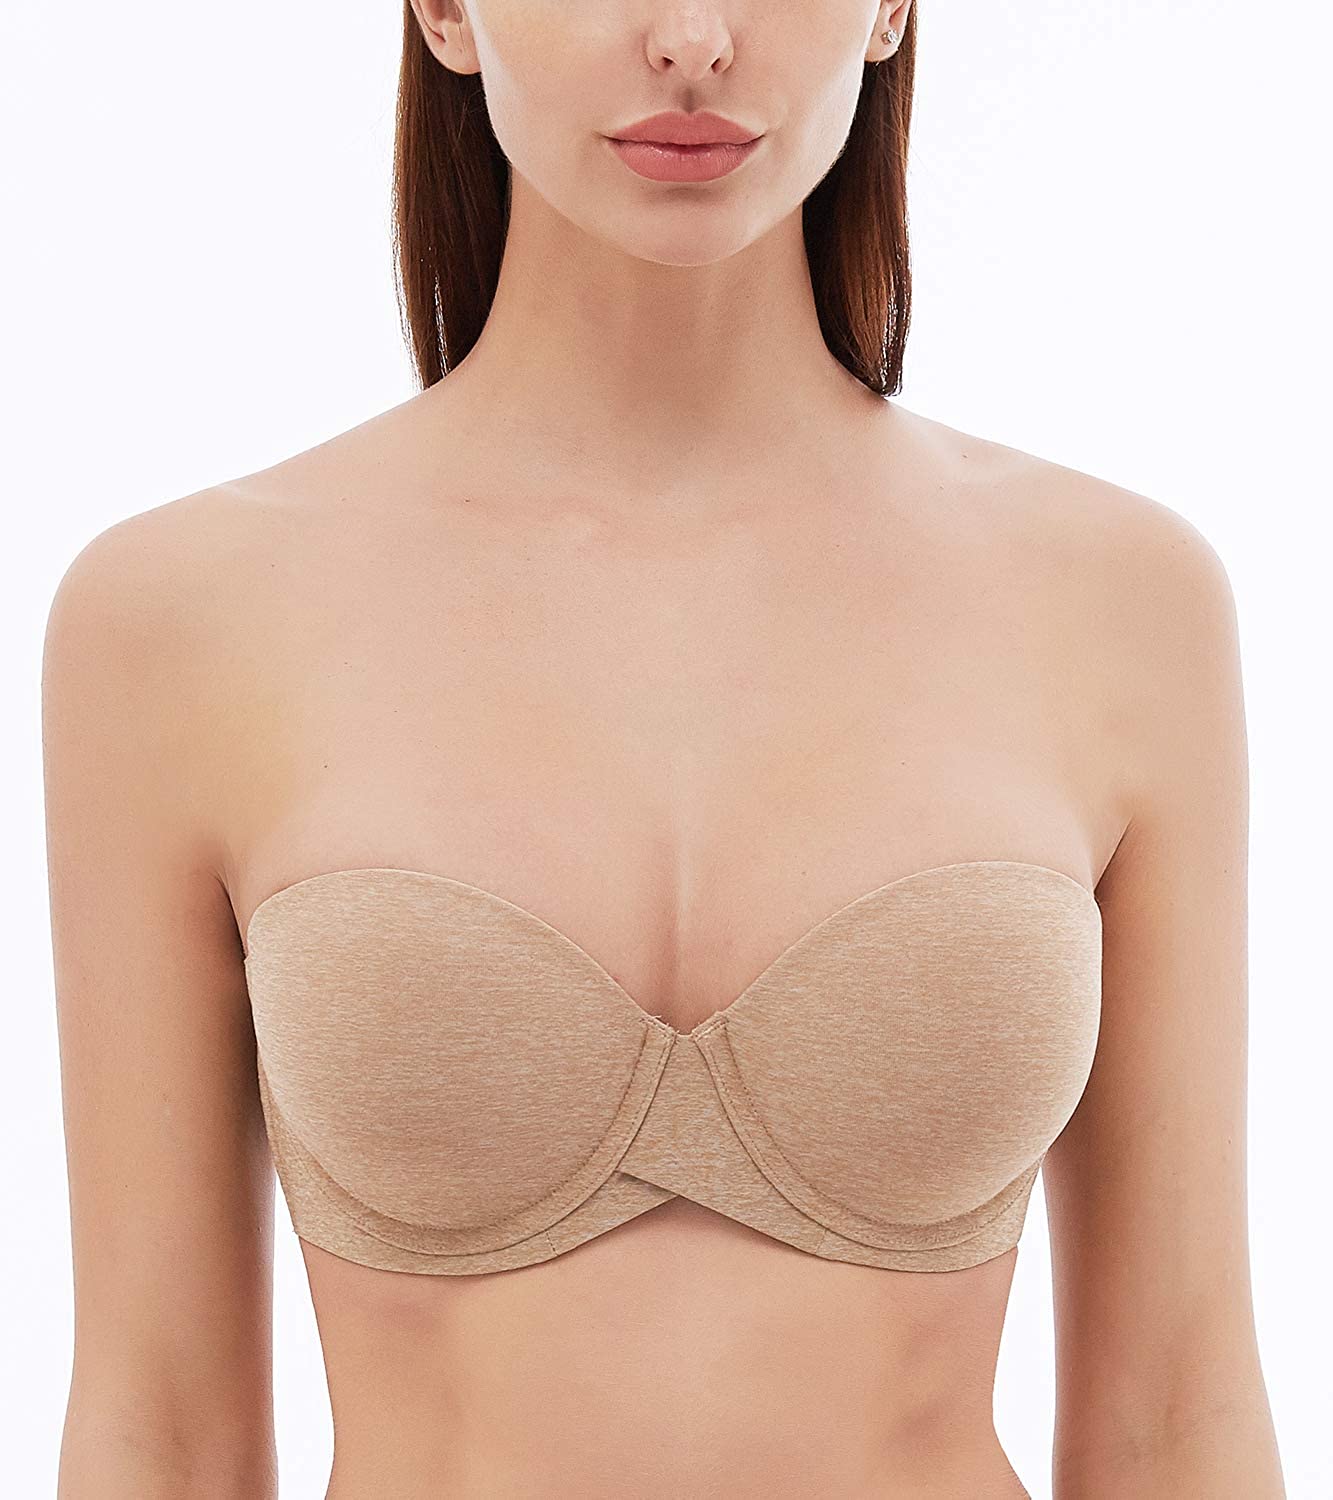 calvin klein clear strap bra - OFF-66% >Free Delivery